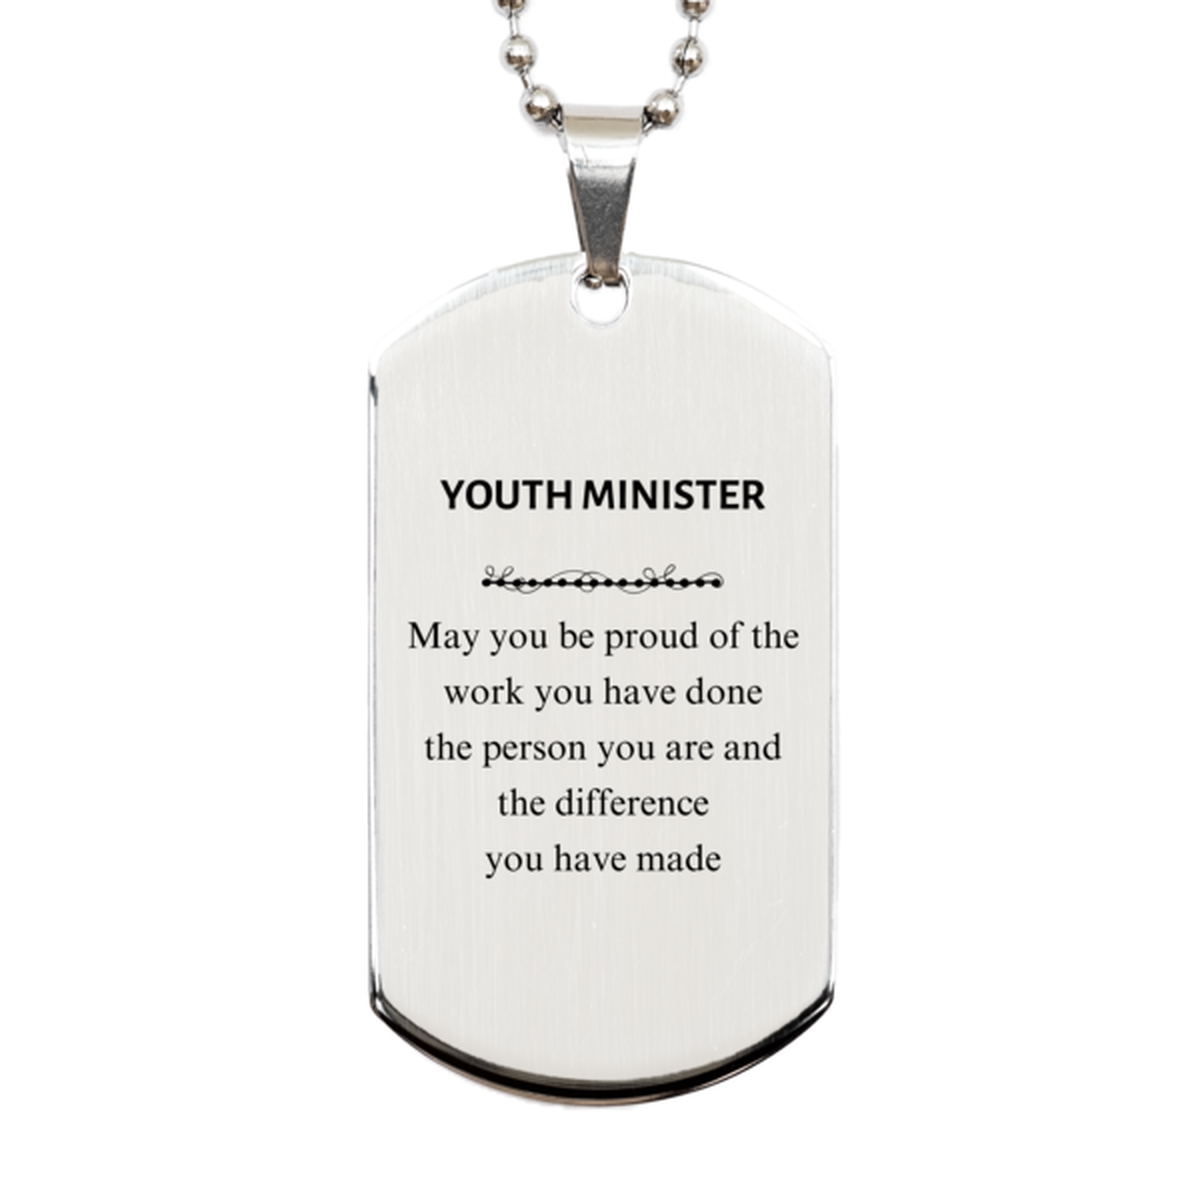 Youth Minister May you be proud of the work you have done, Retirement Youth Minister Silver Dog Tag for Colleague Appreciation Gifts Amazing for Youth Minister